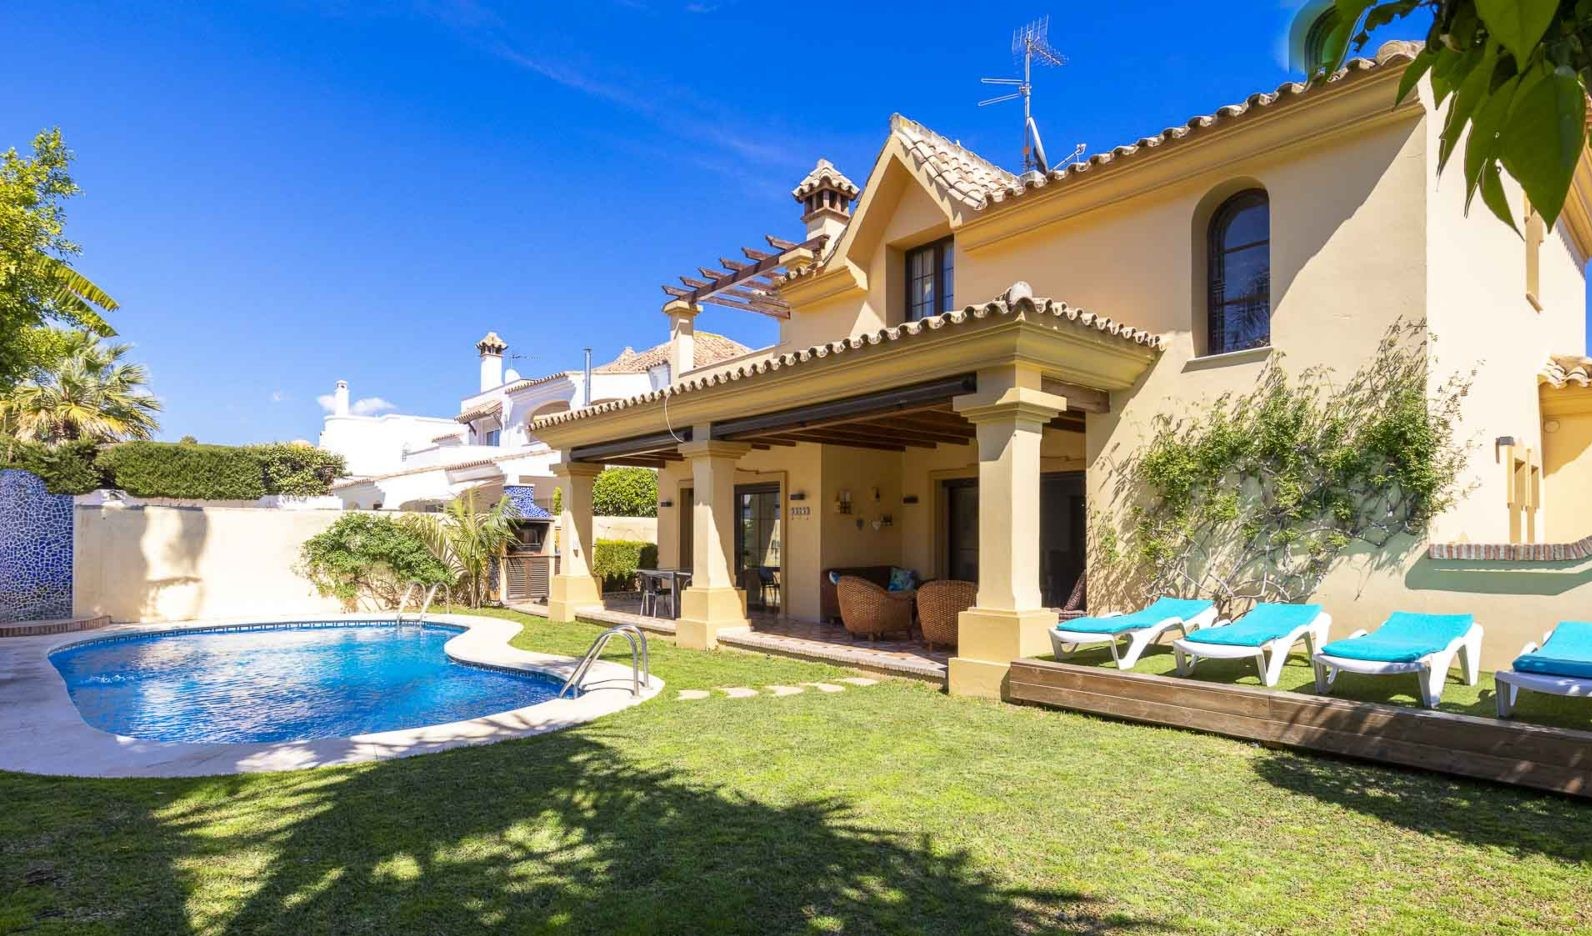 Property Image 1 - Cozy and spacious villa walking distance to the beach